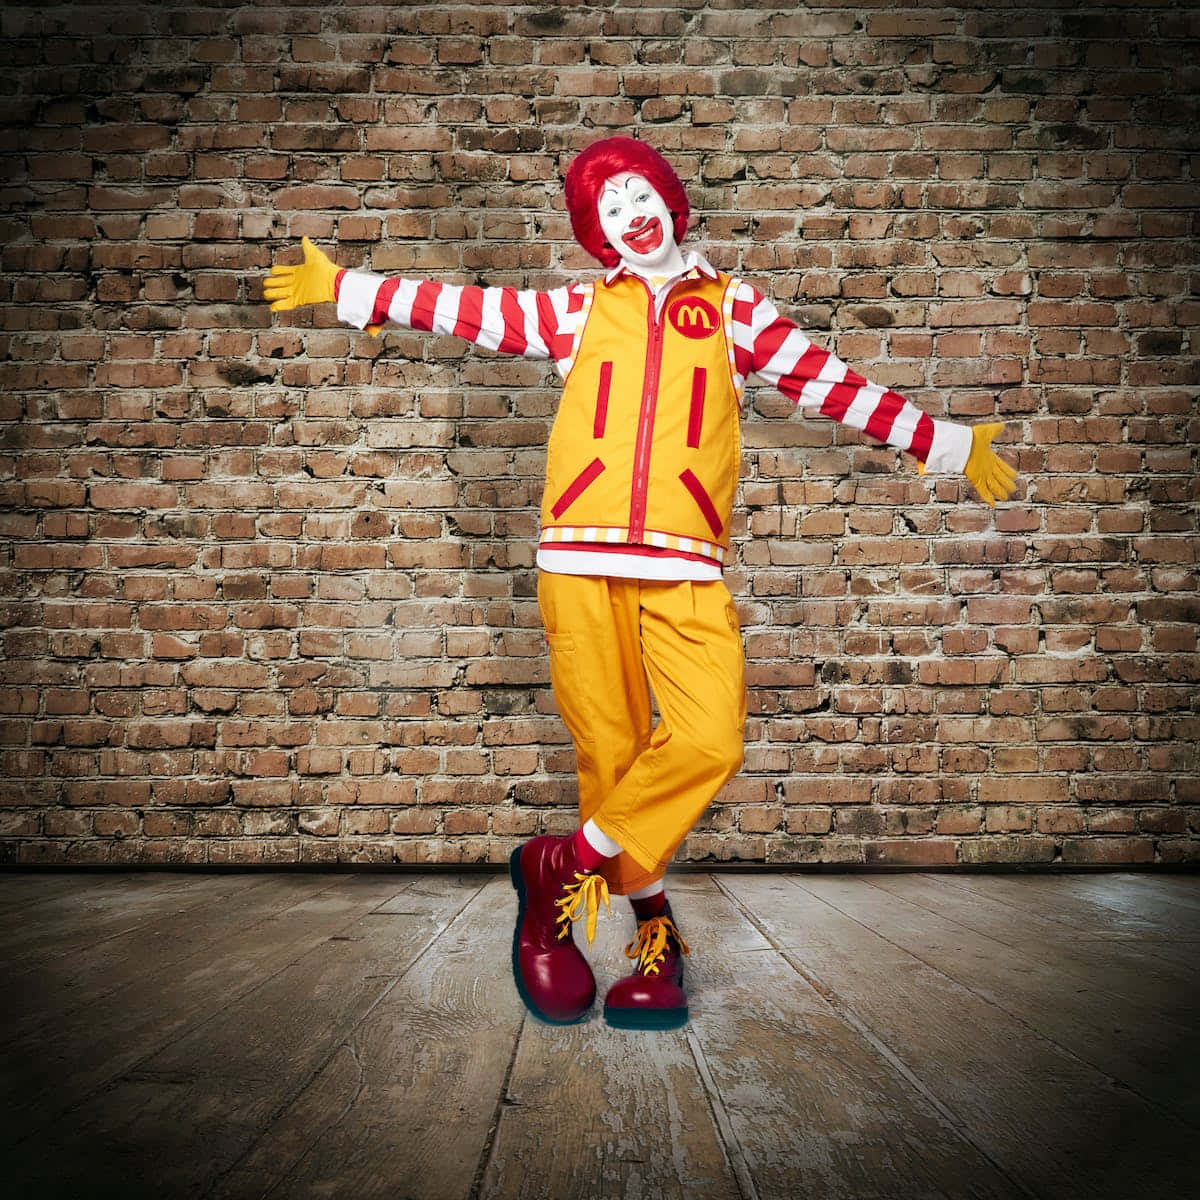 A Mcdonald's Clown In A Red Outfit